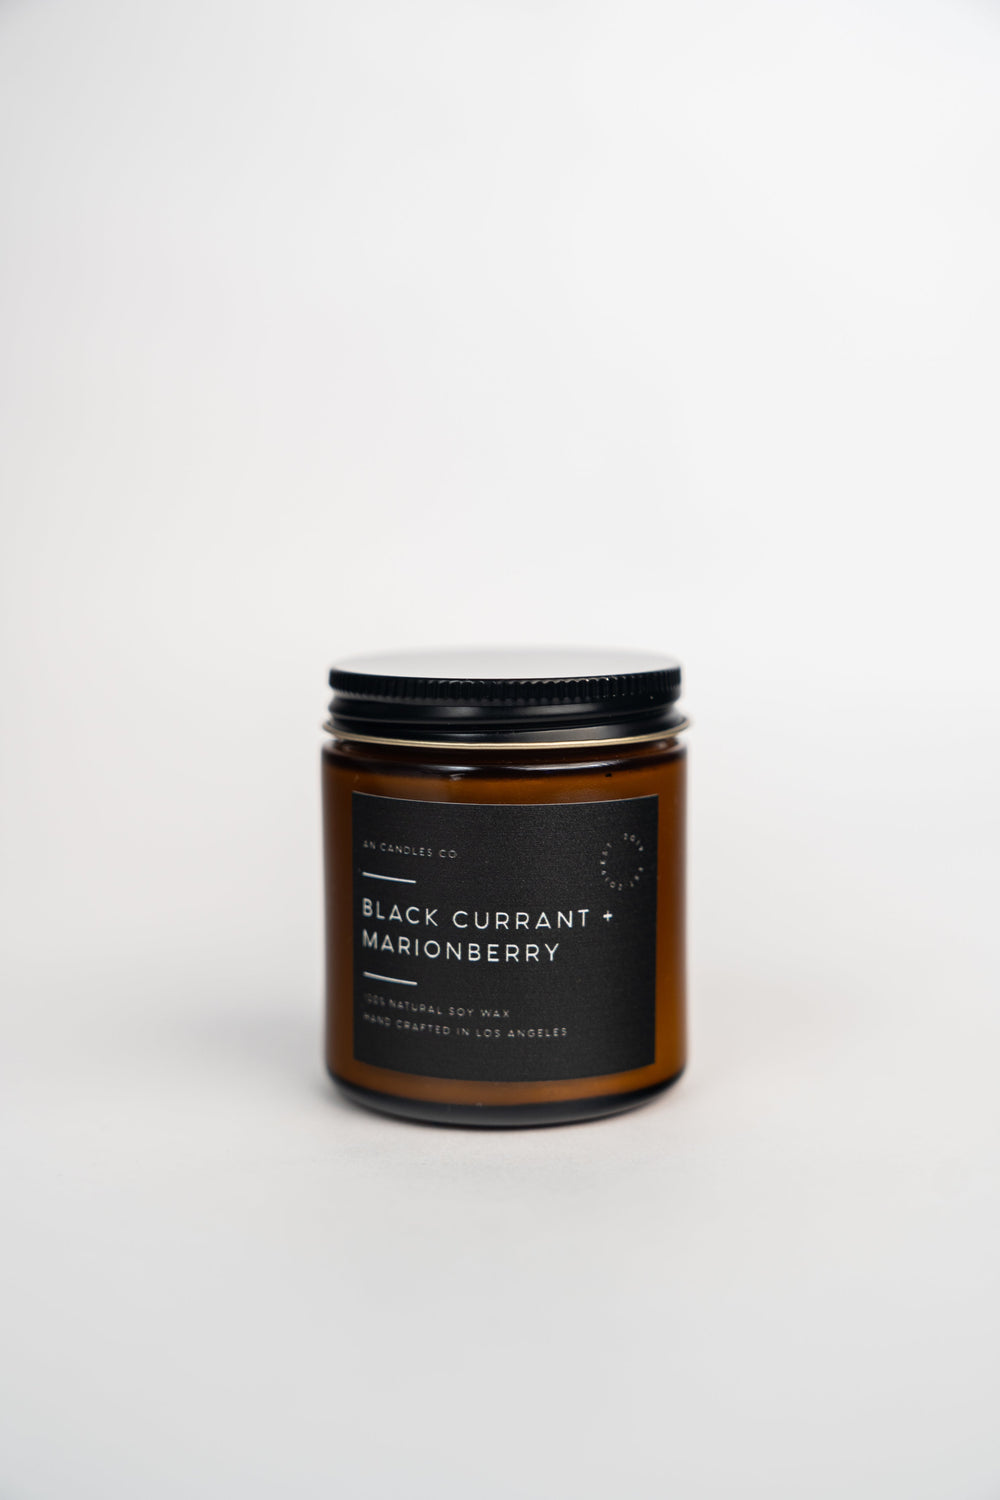 Black Currant + Marionberry Candle